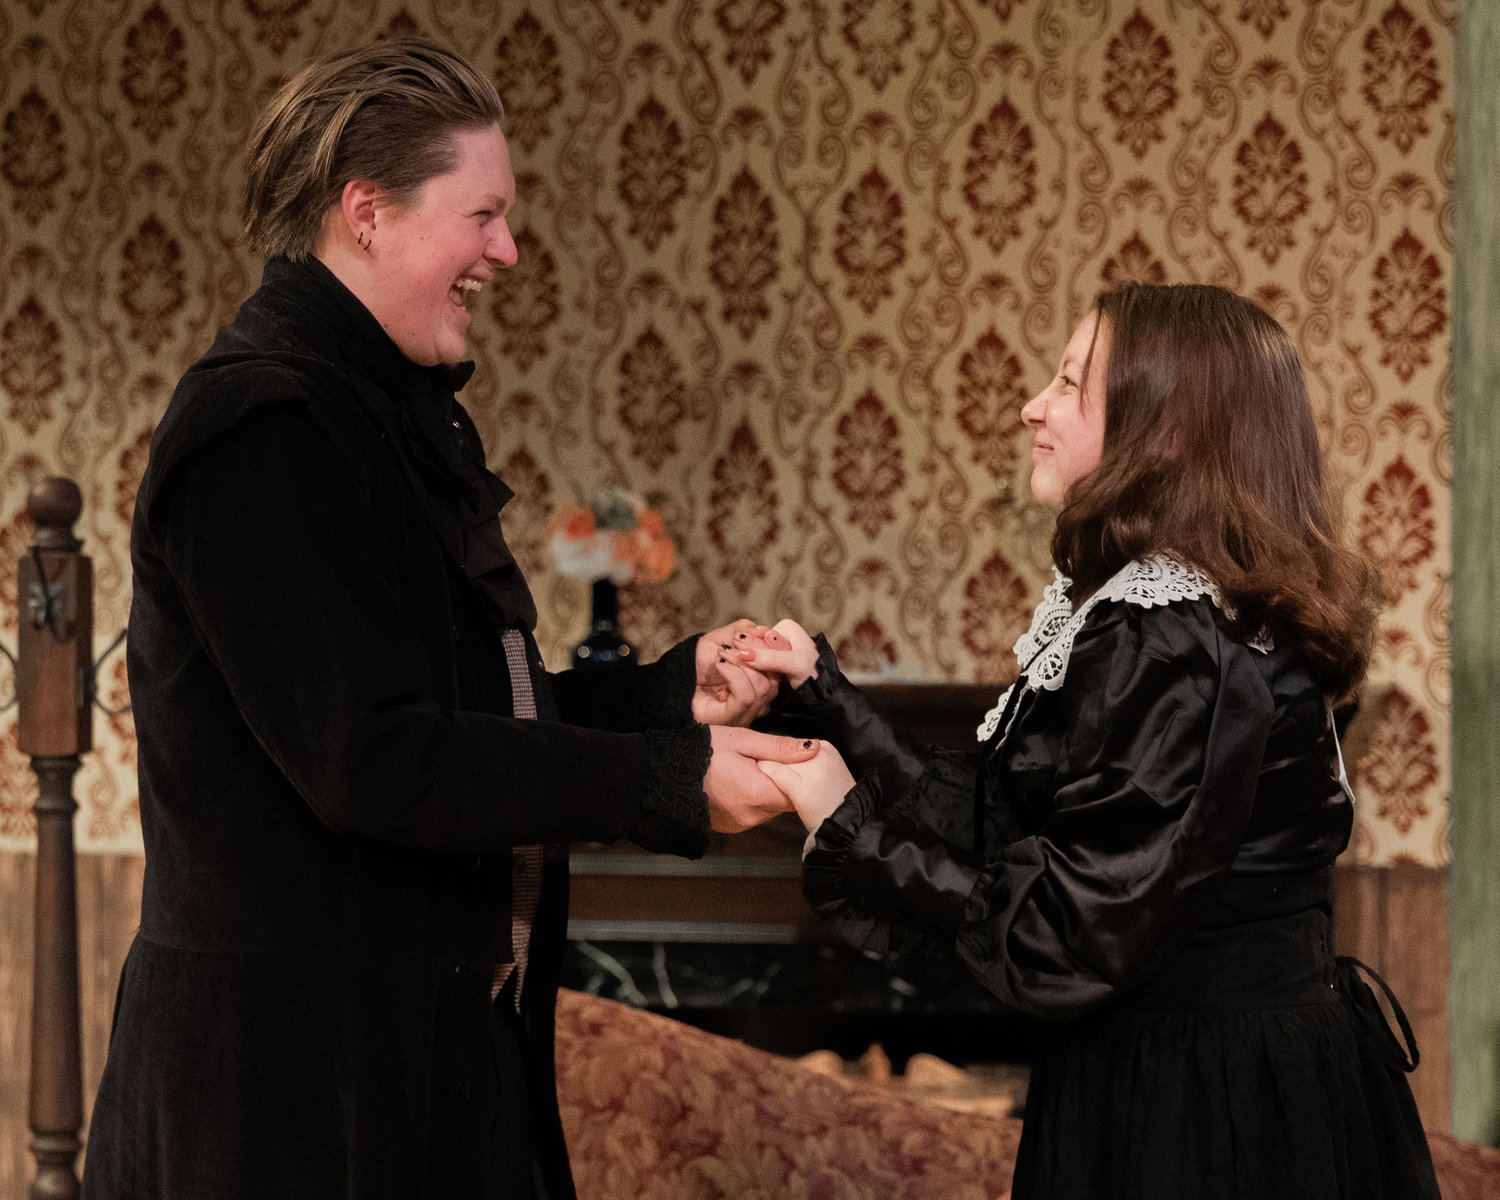 Derek Kealoha playing “Robert Browning,” and Alyssa Graves playing “Elizabeth Barrett,” smile while performing on stage during dress rehearsals for “Leaving 50 Wimpole Street,” a play by John Pratt directed by Emmy Kreilkamp presented by the Centralia College Theatre program.